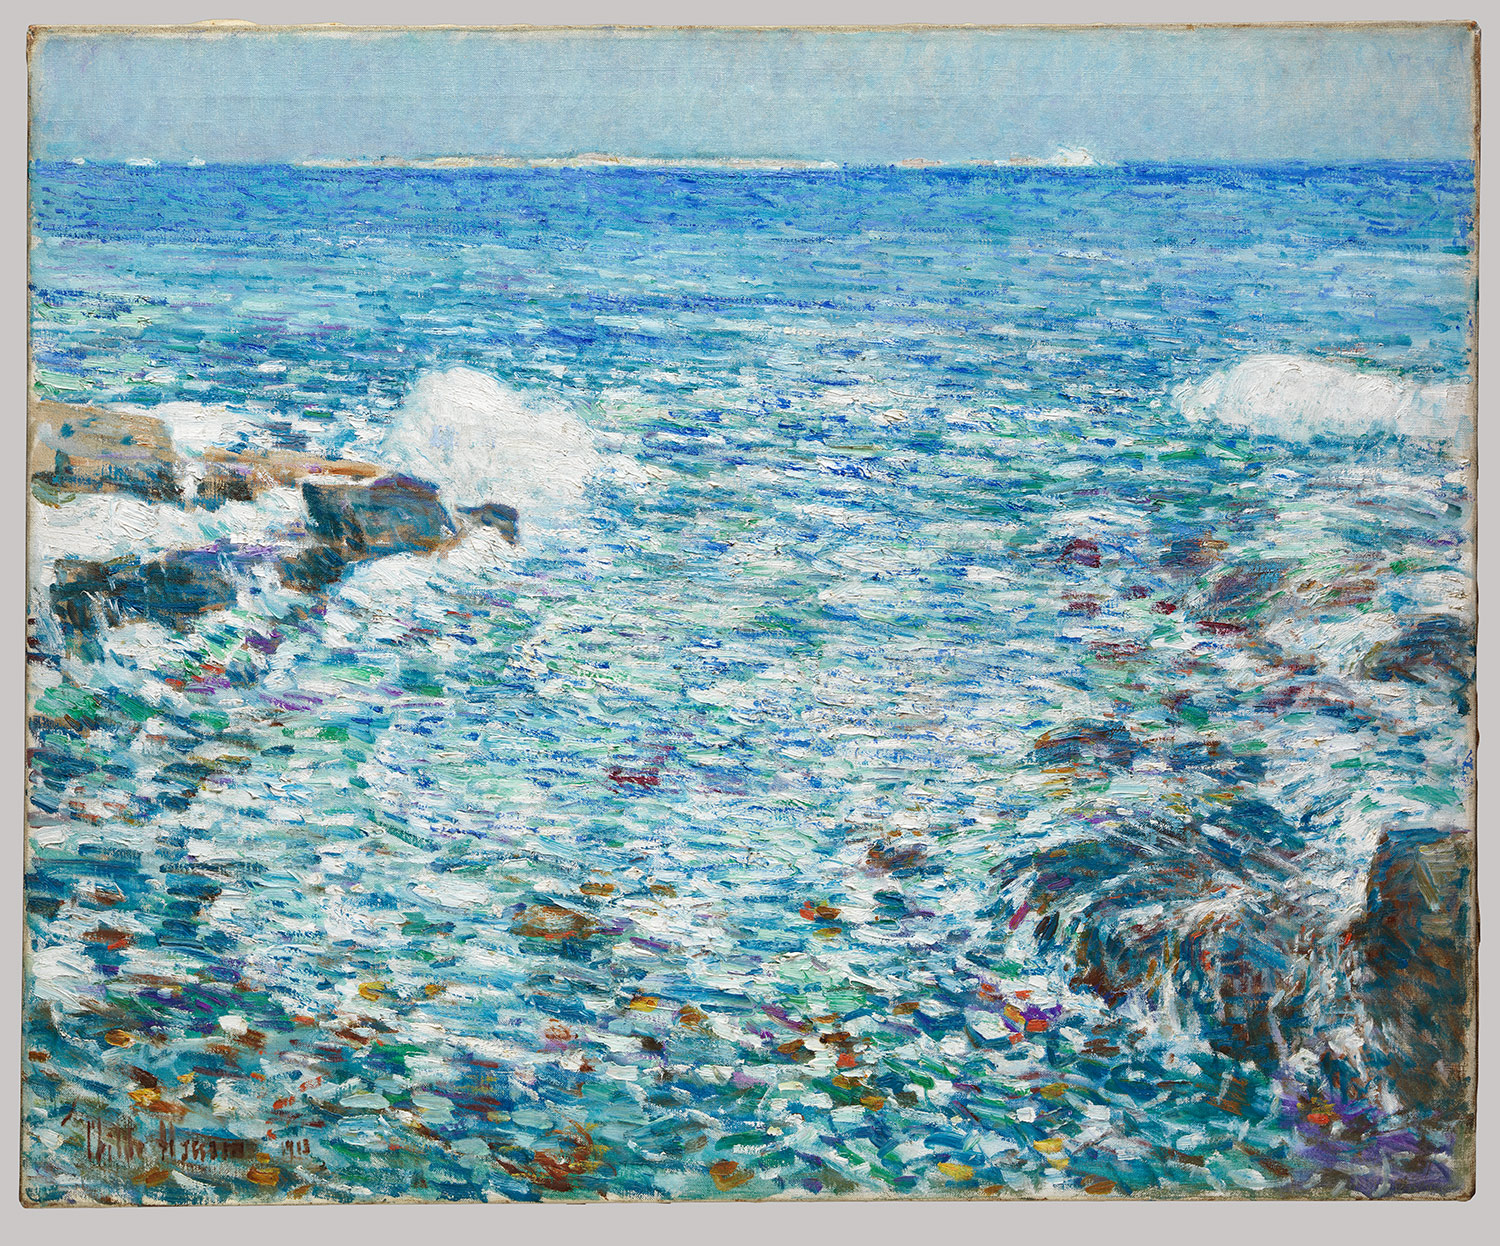 Hassam's summer sojourns on the Isles of Shoals, ten miles east 